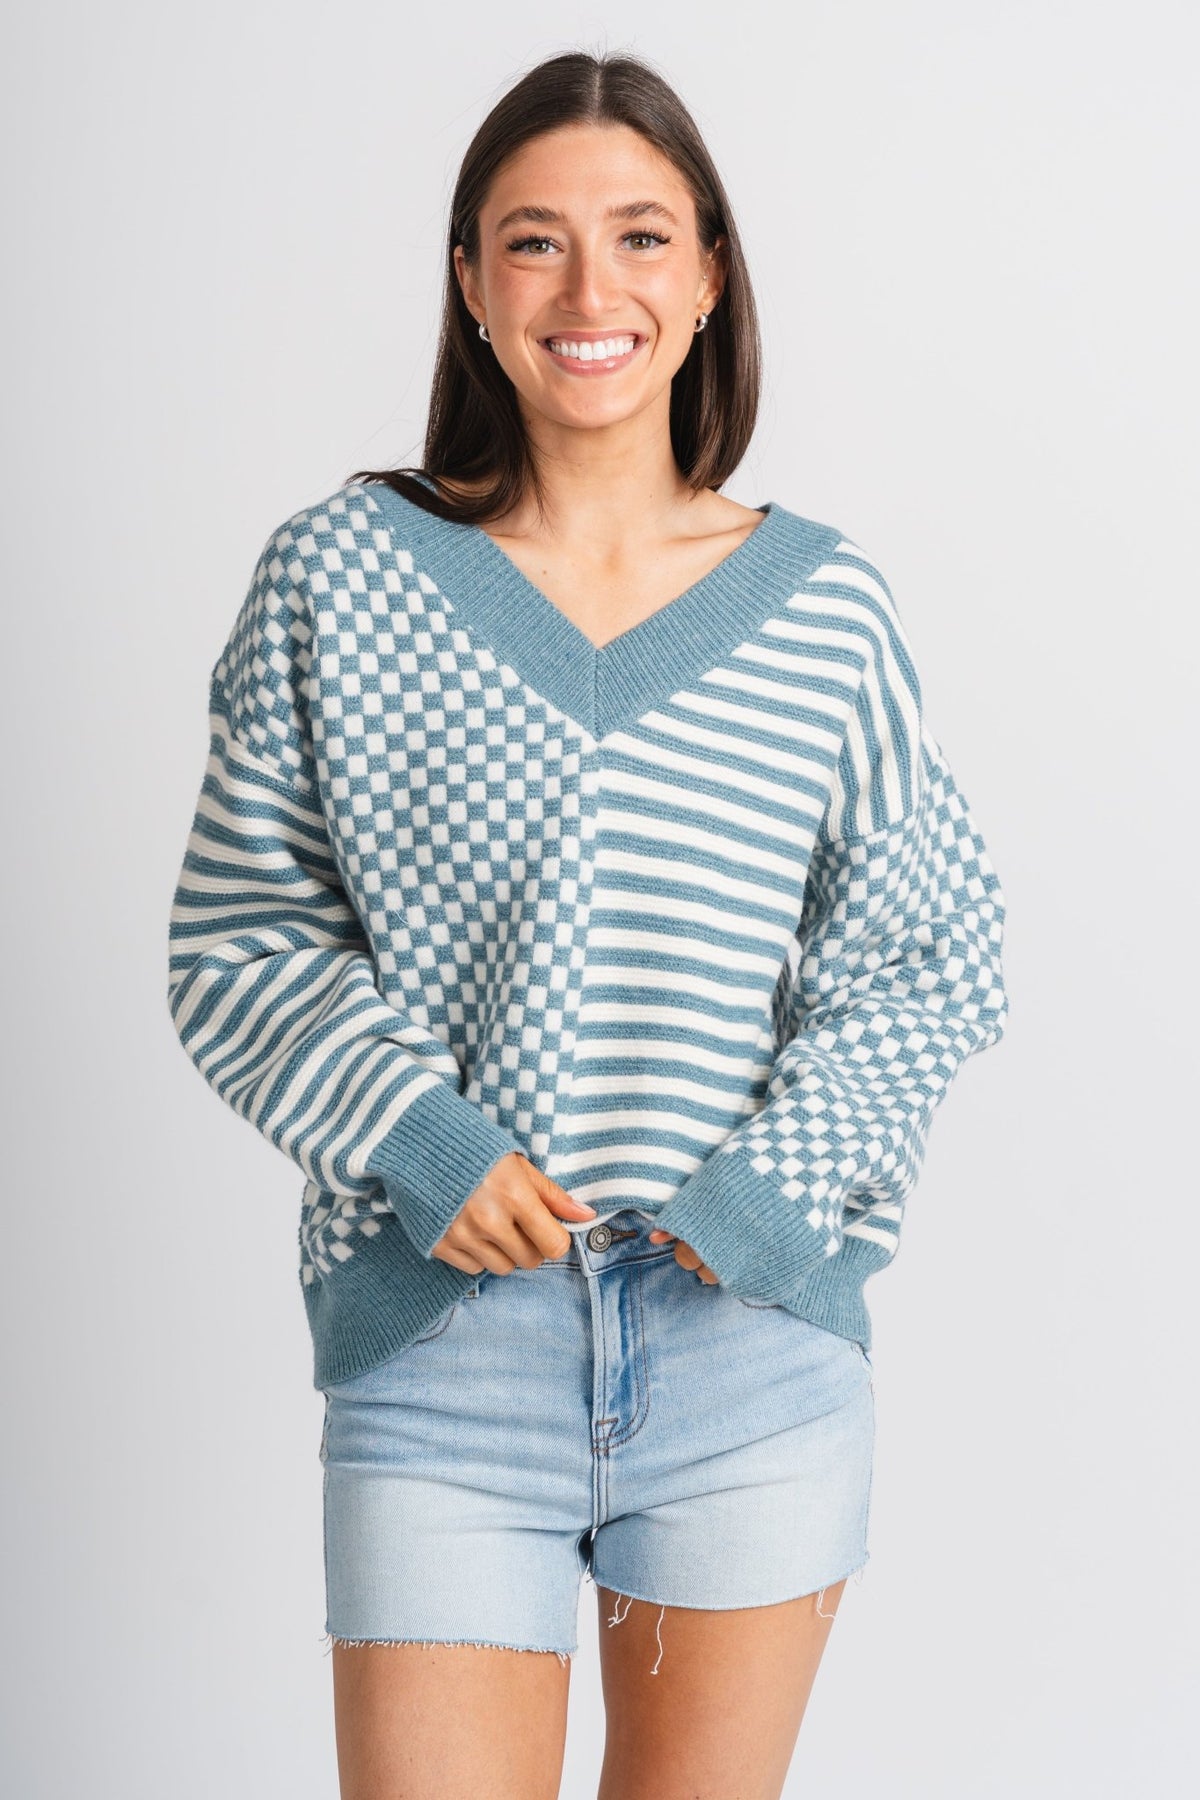 Checkered sweater ivory/blue – Boutique Sweaters | Fashionable Sweaters at Lush Fashion Lounge Boutique in Oklahoma City